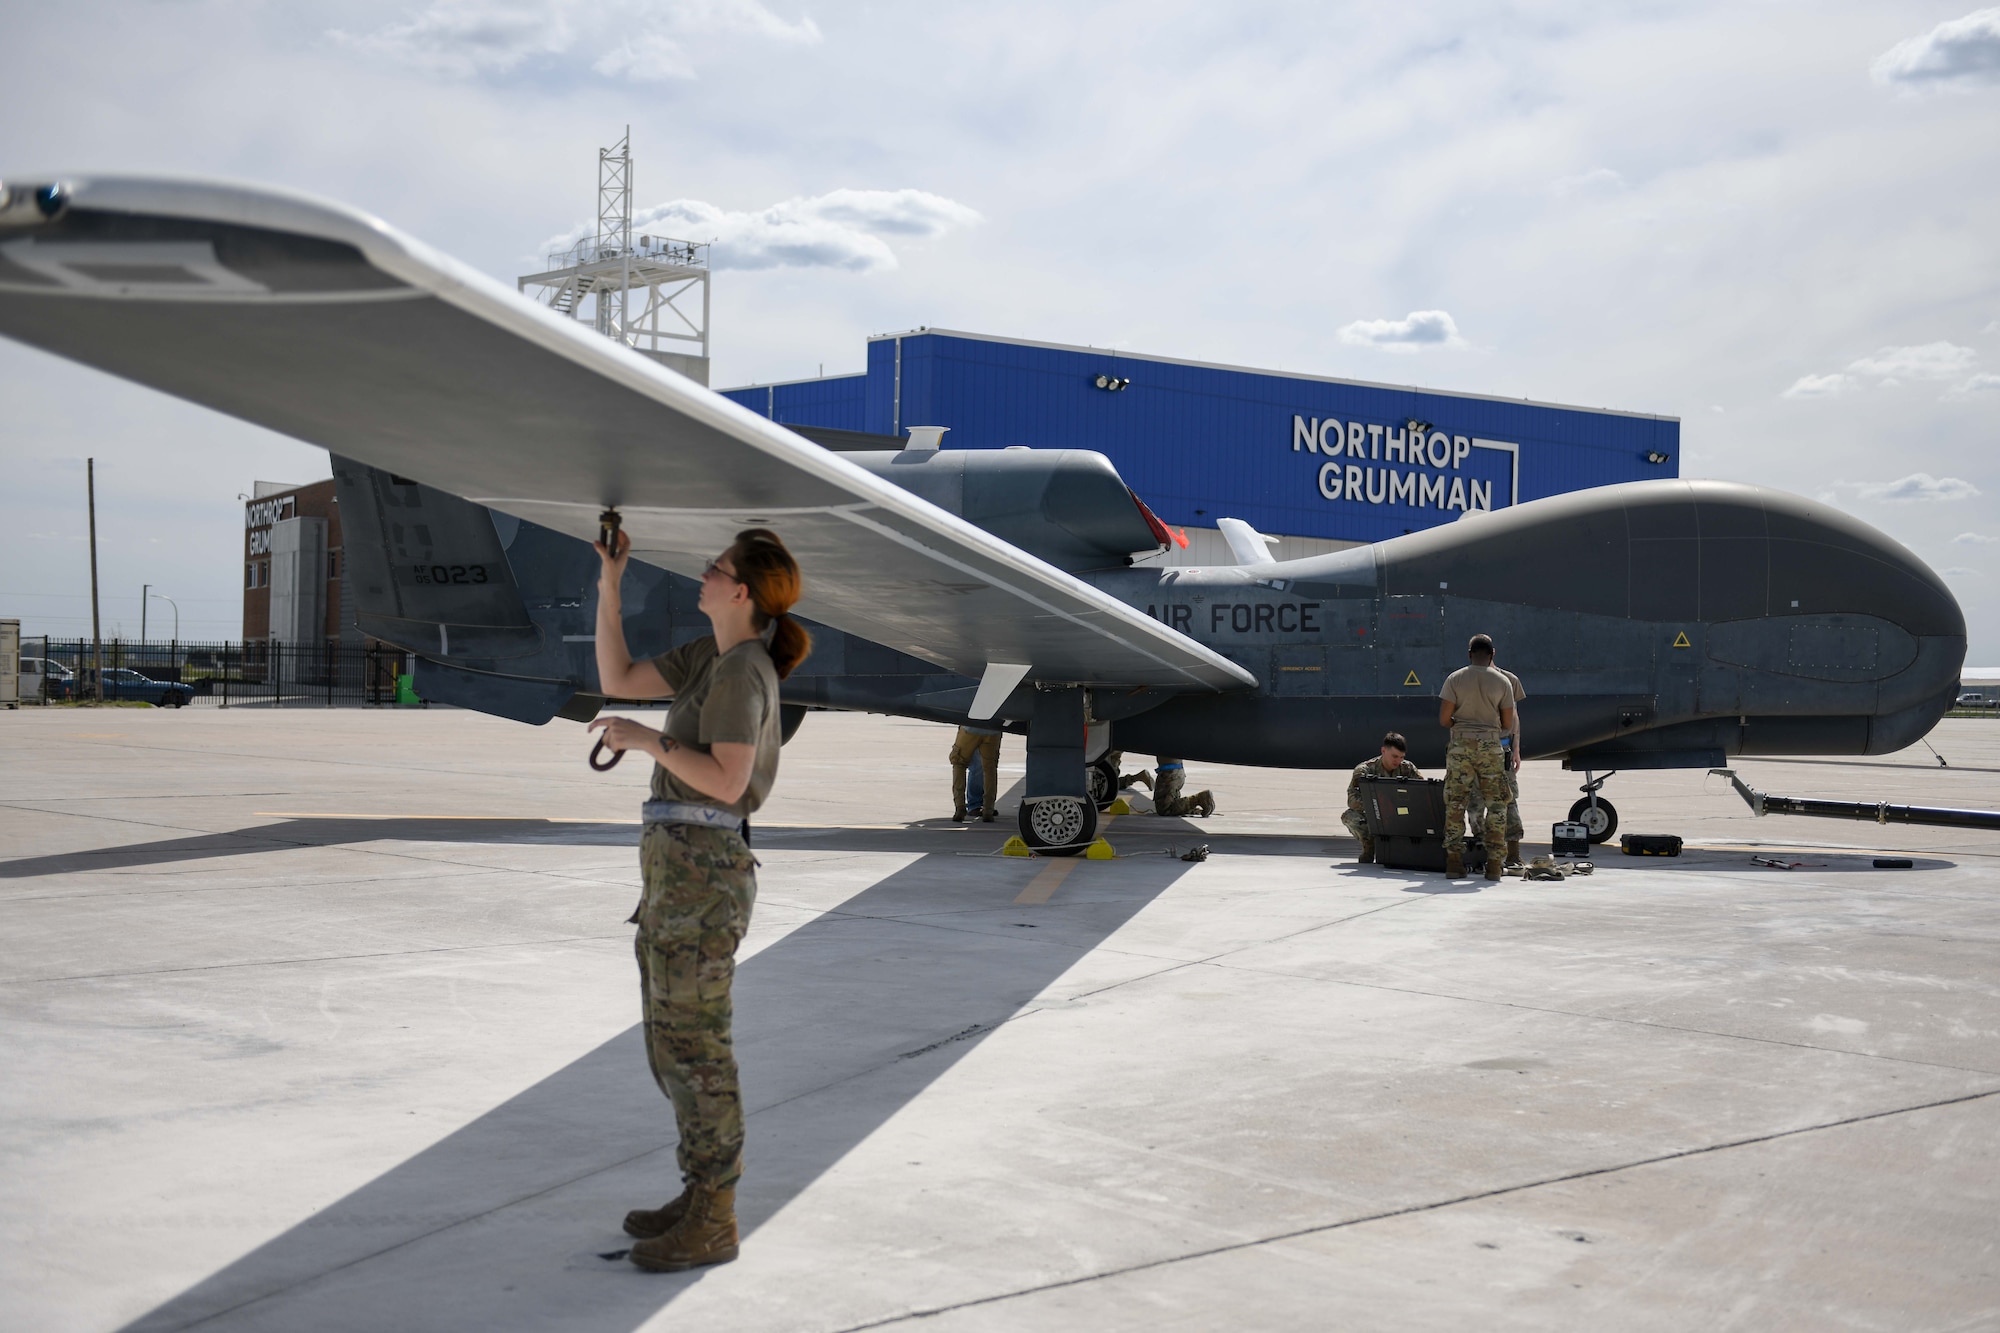 Airmen assigned to the 319th Aircraft Maintenance Squadron from Grand Forks Air Force Base, North Dakota, perform a maintenance check June 6, 2022, on an RQ-4 Block 30 Global Hawk remotely piloted aircraft at Grand Sky on Grand Forks Air Force Base. The RQ-4 Block 30s will be used at the Test Resource Management Center’s High Speed System Test Department. Located on Grand Forks Air Force Base, Grand Sky is a business and aviation park focused on developing and growing the unmanned aerial systems industry. (U.S. Air Force photo by Senior Airman Ashley Richards)